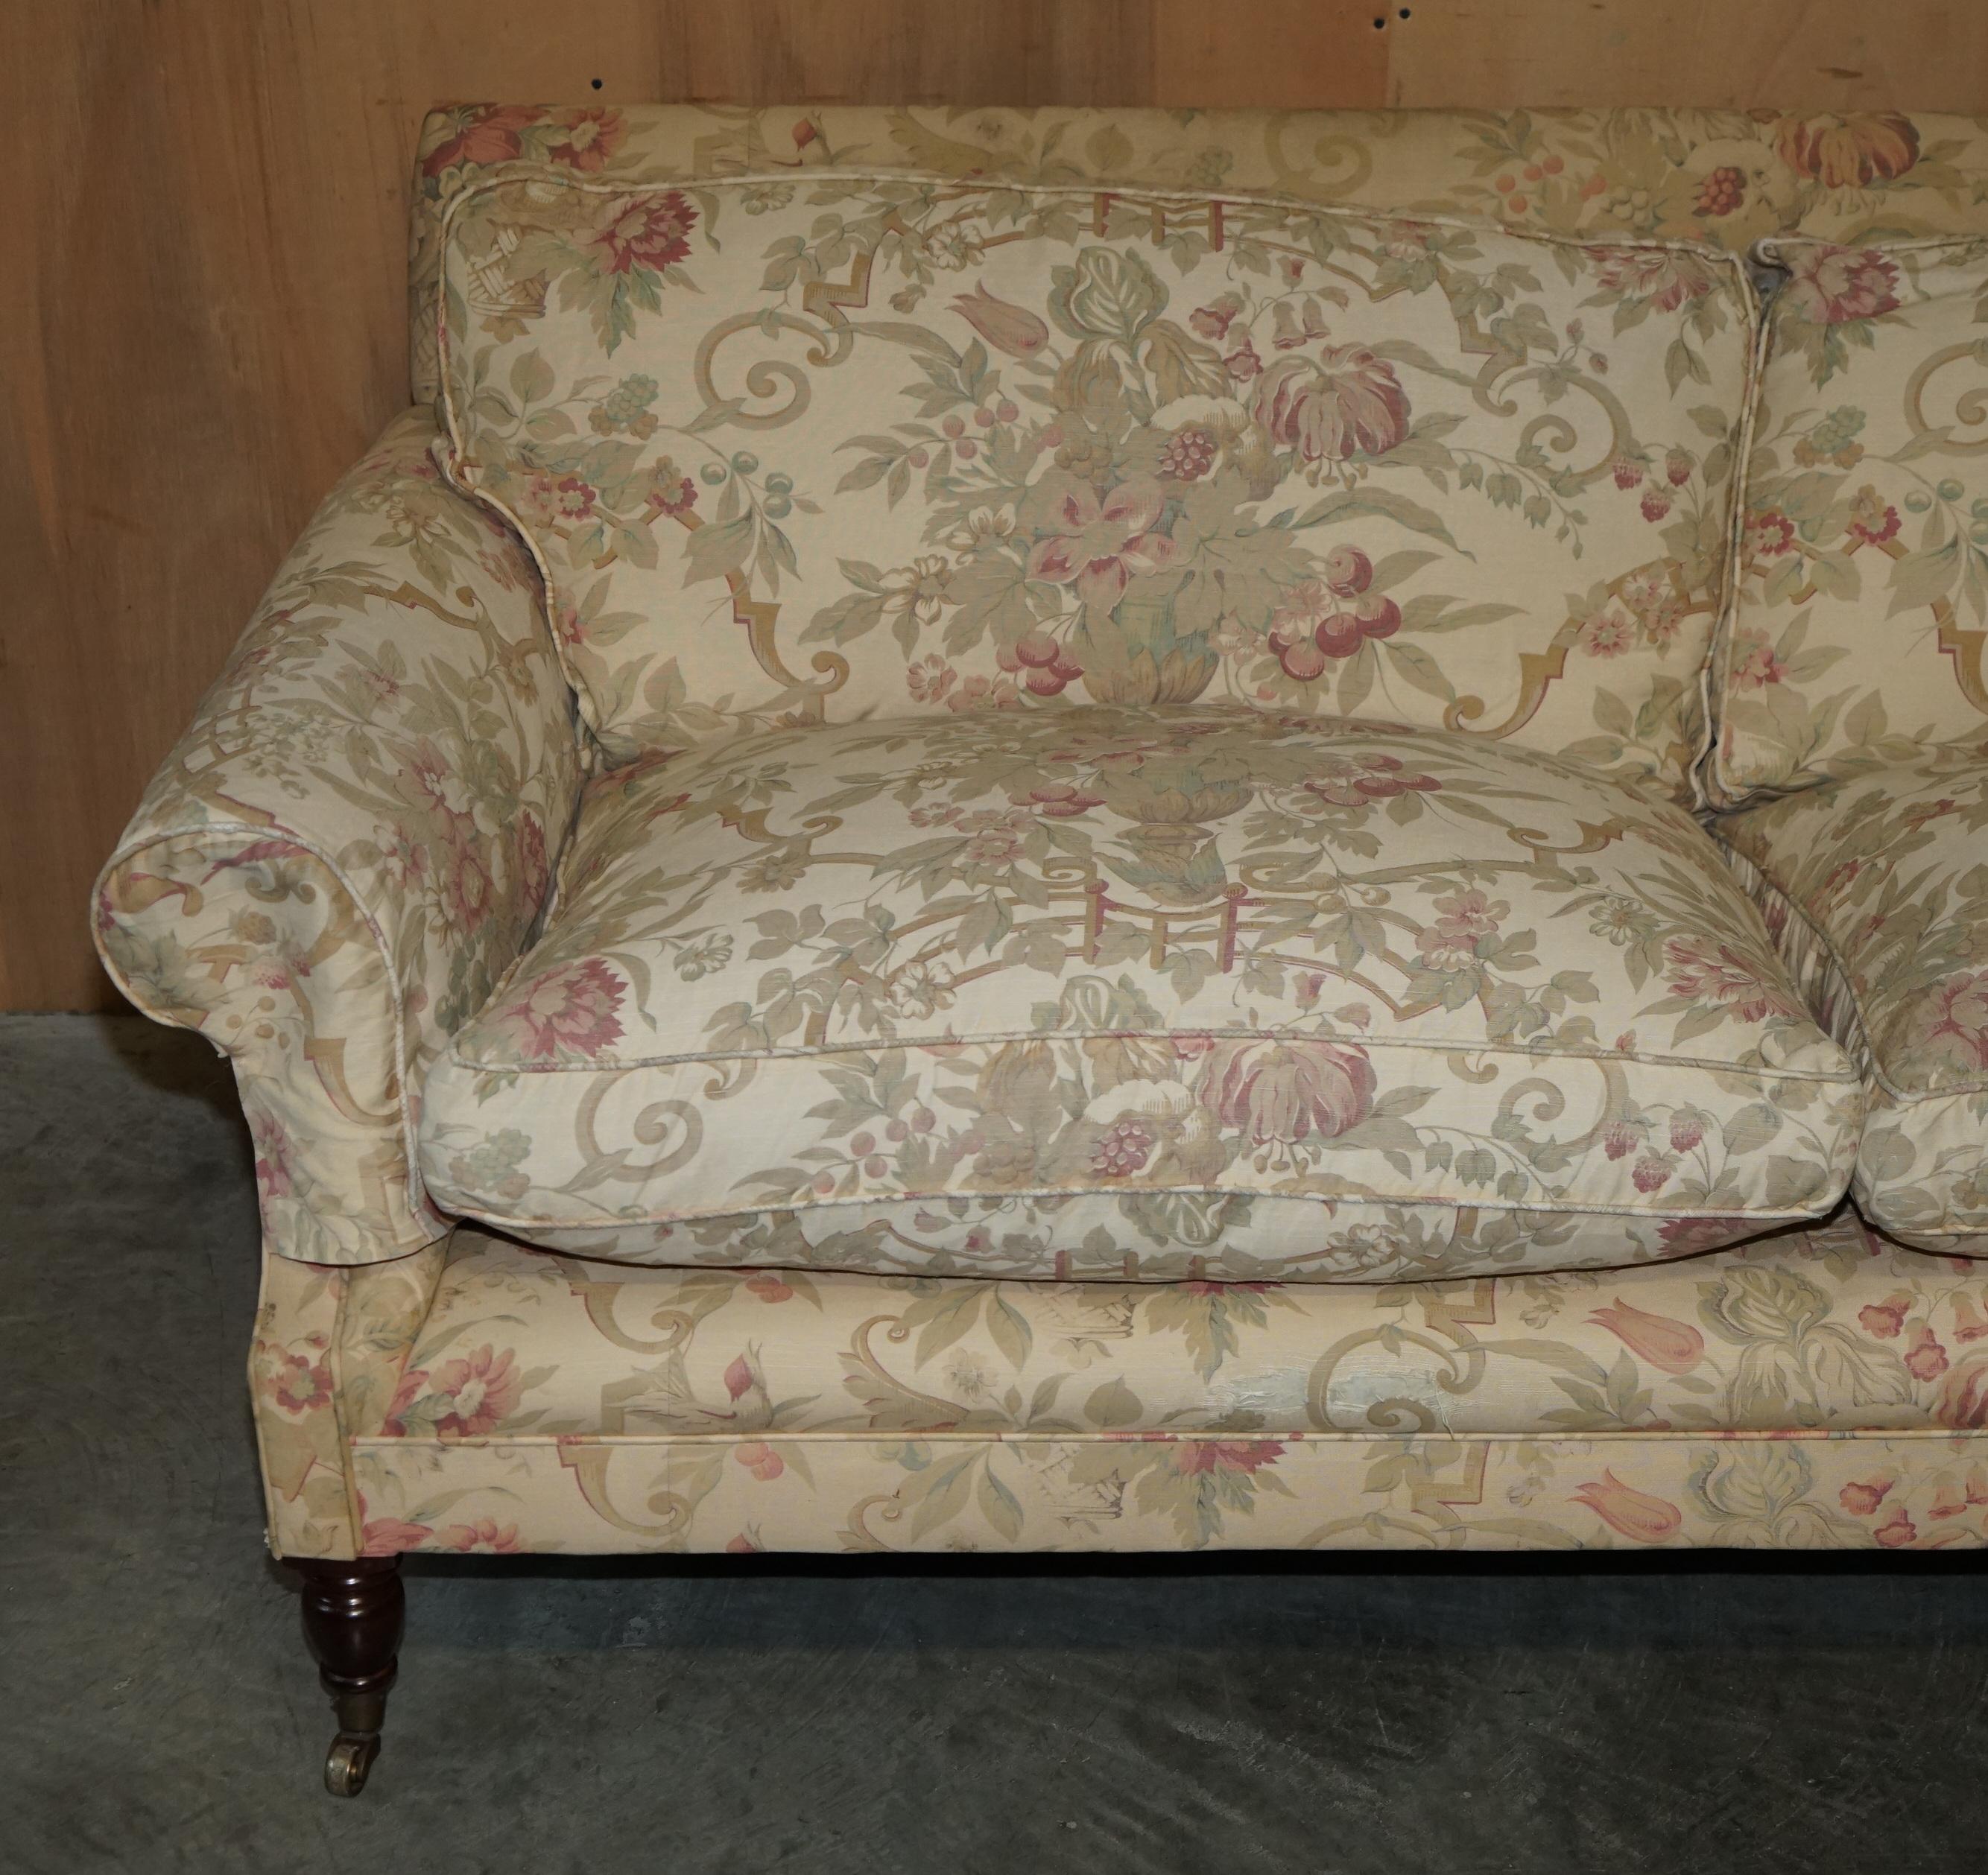 English GEORGE SMITH CHELSEA 3 SEAT SOFA IN ORIGINAL UPHOLSTERY PART SUiTE For Sale